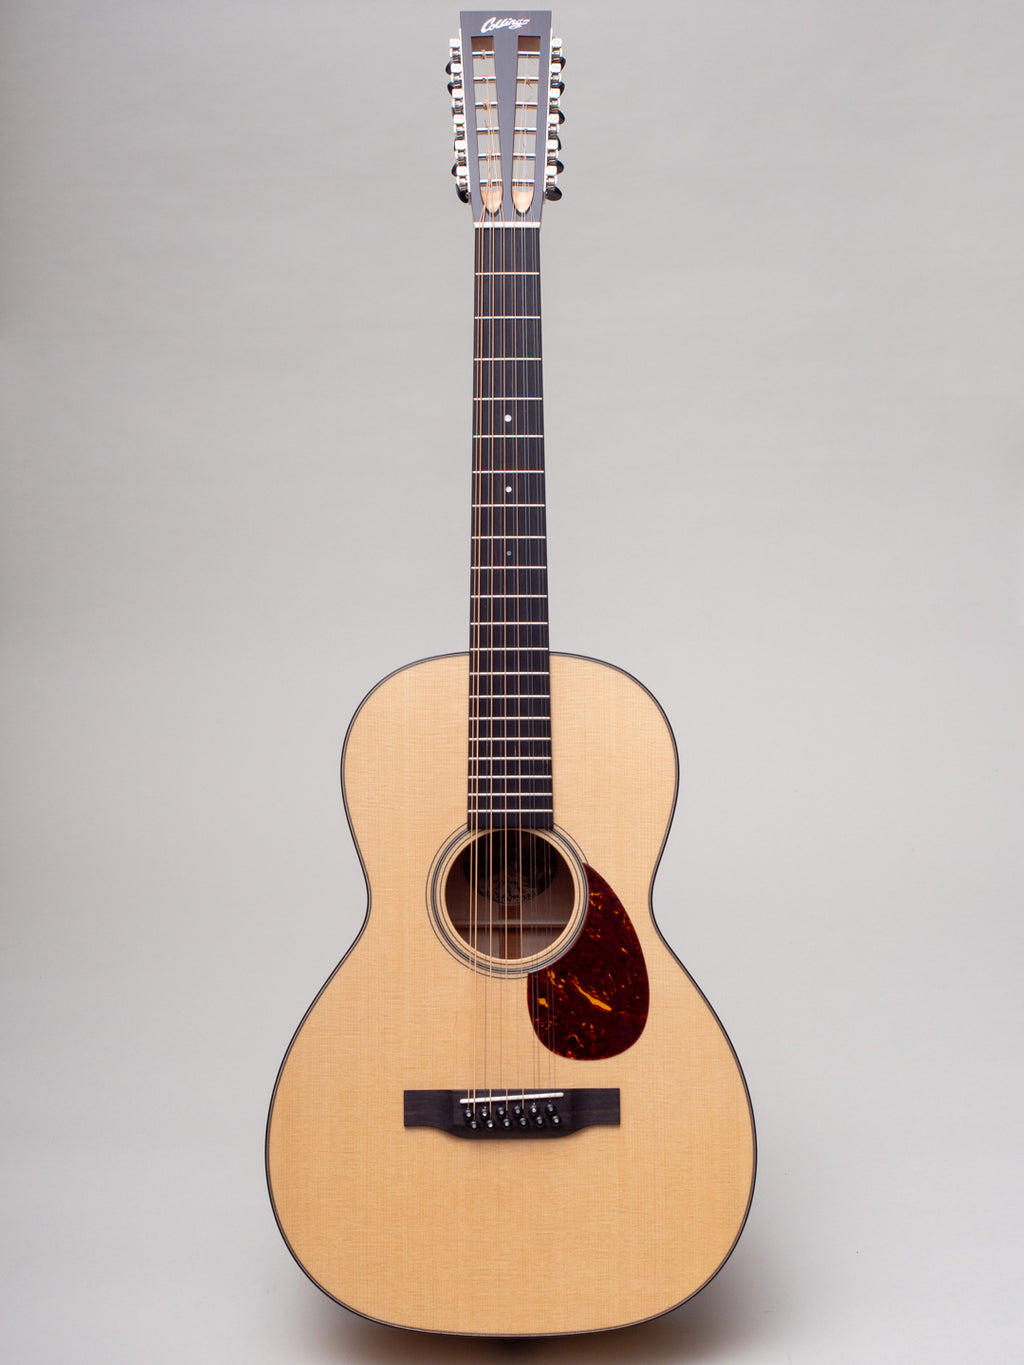 2022 Collings 01 12 String Maple